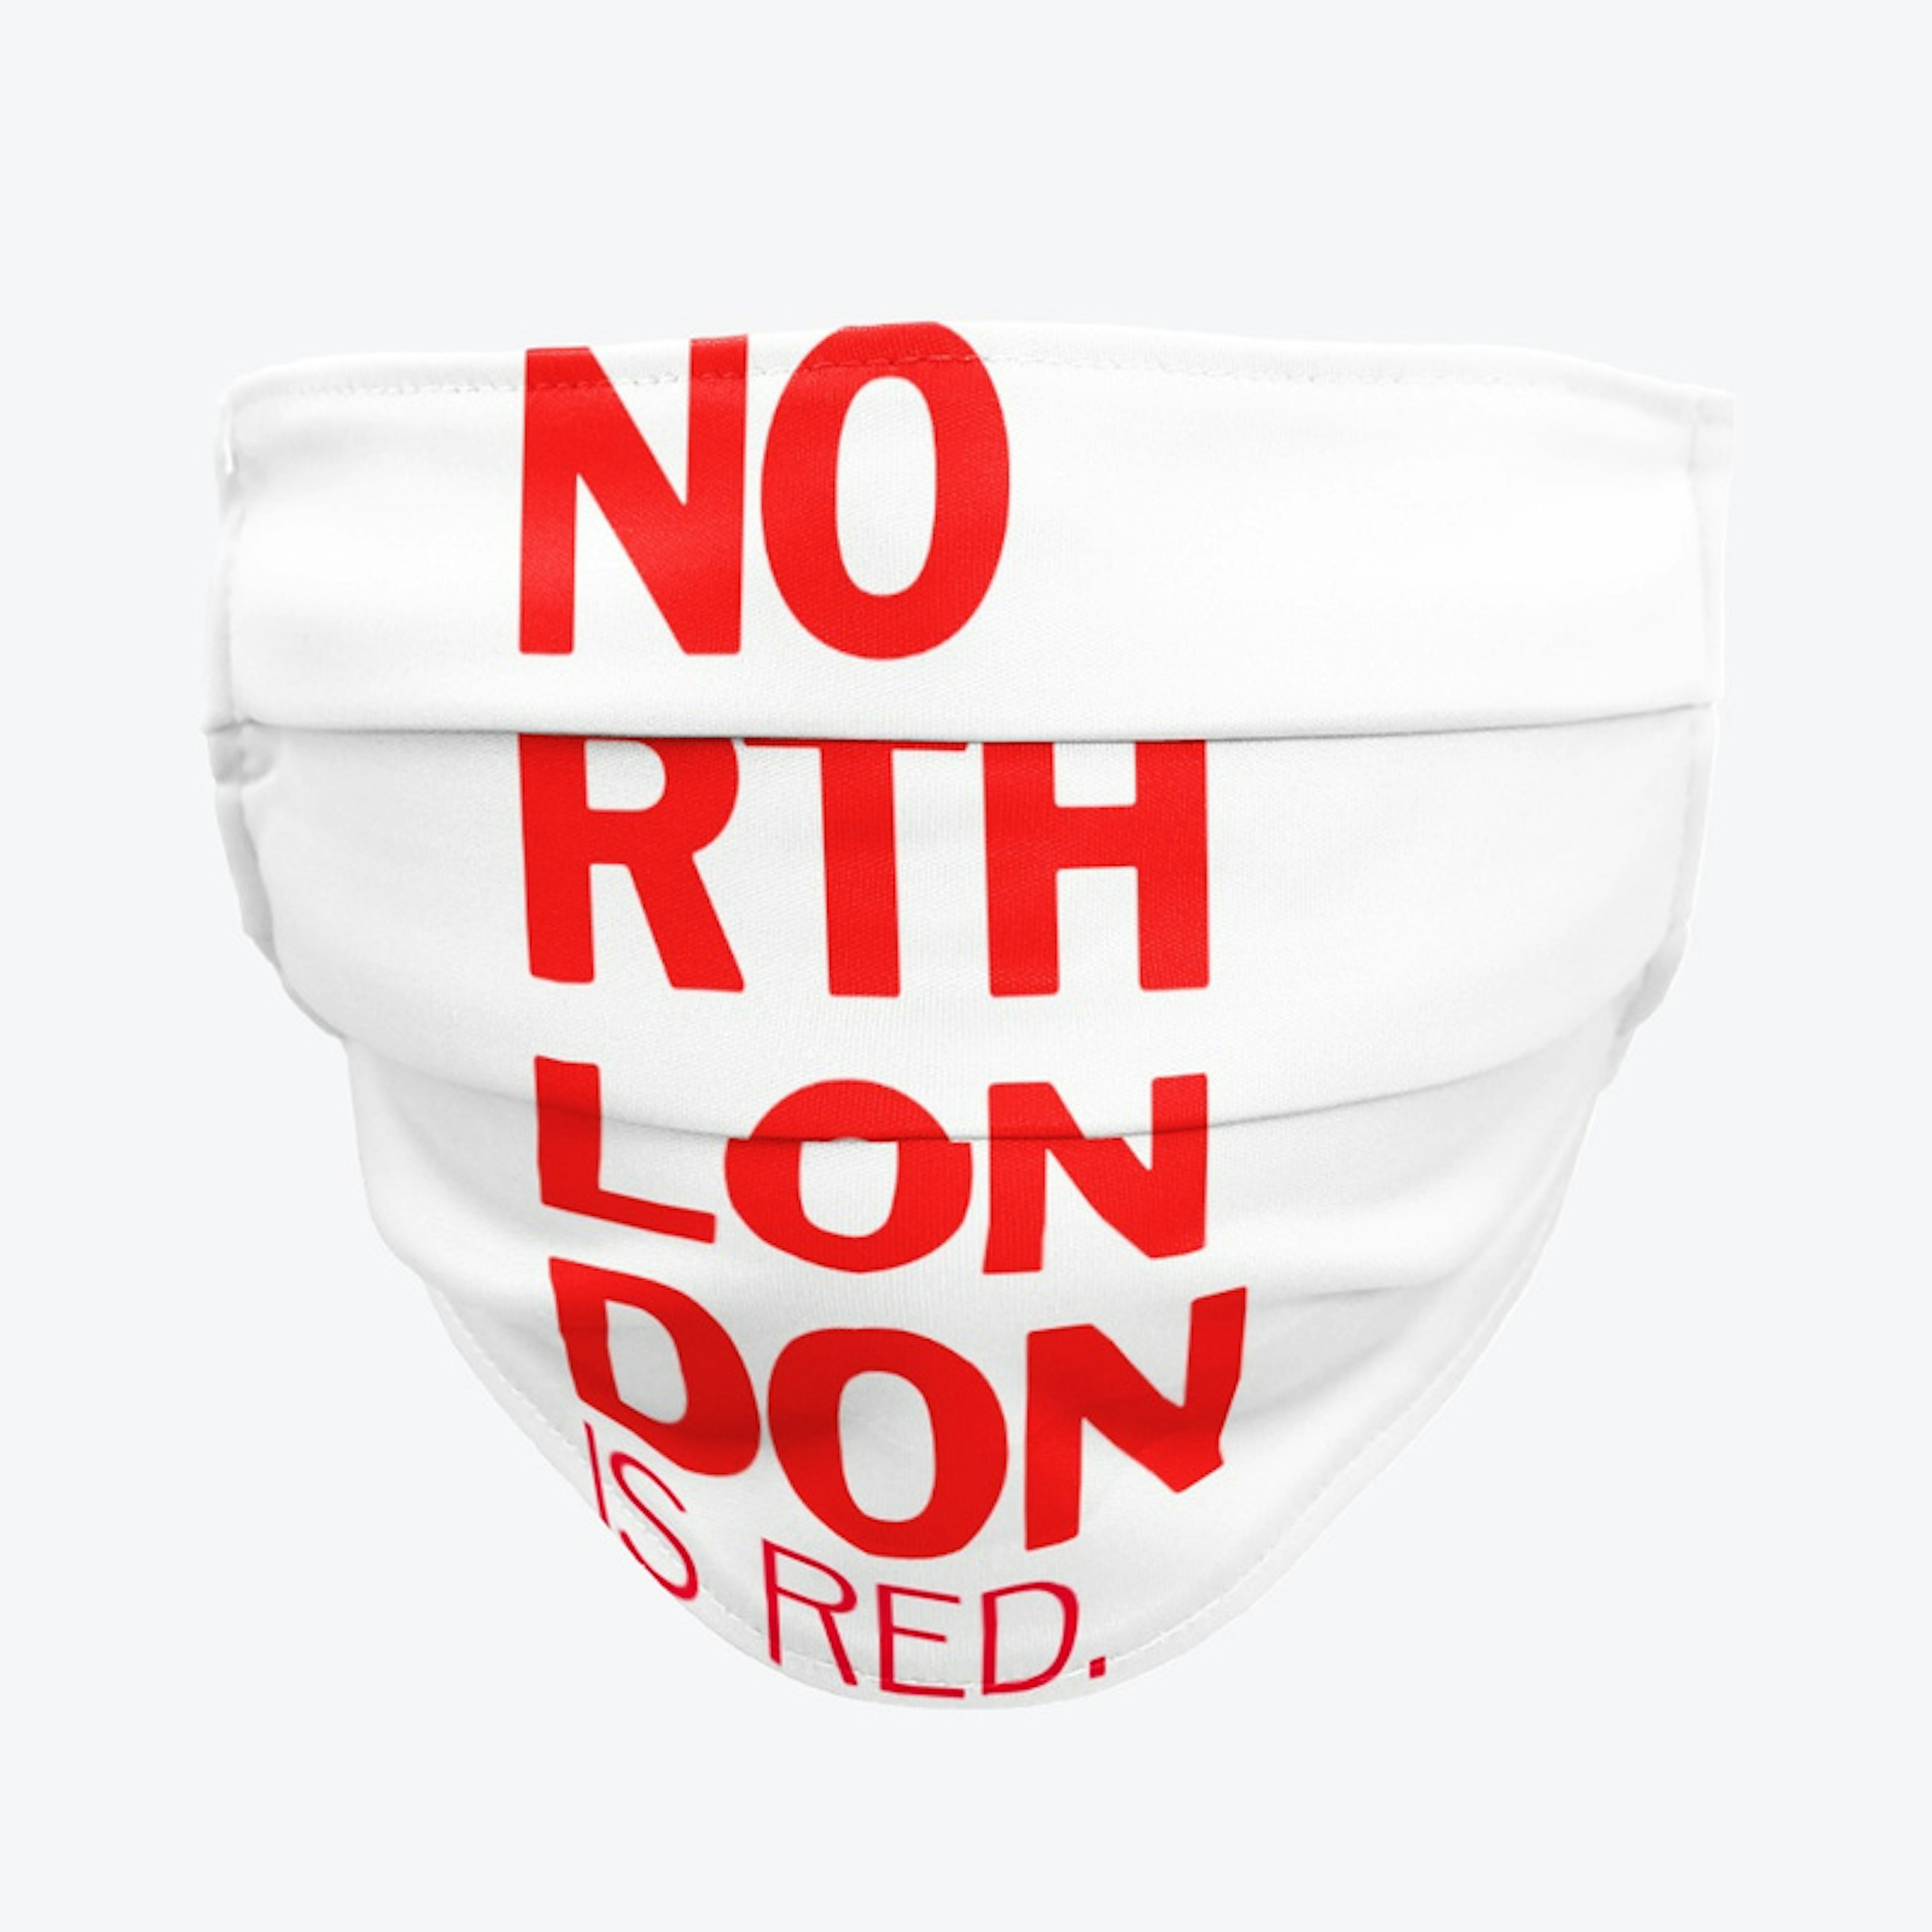 North London is Red